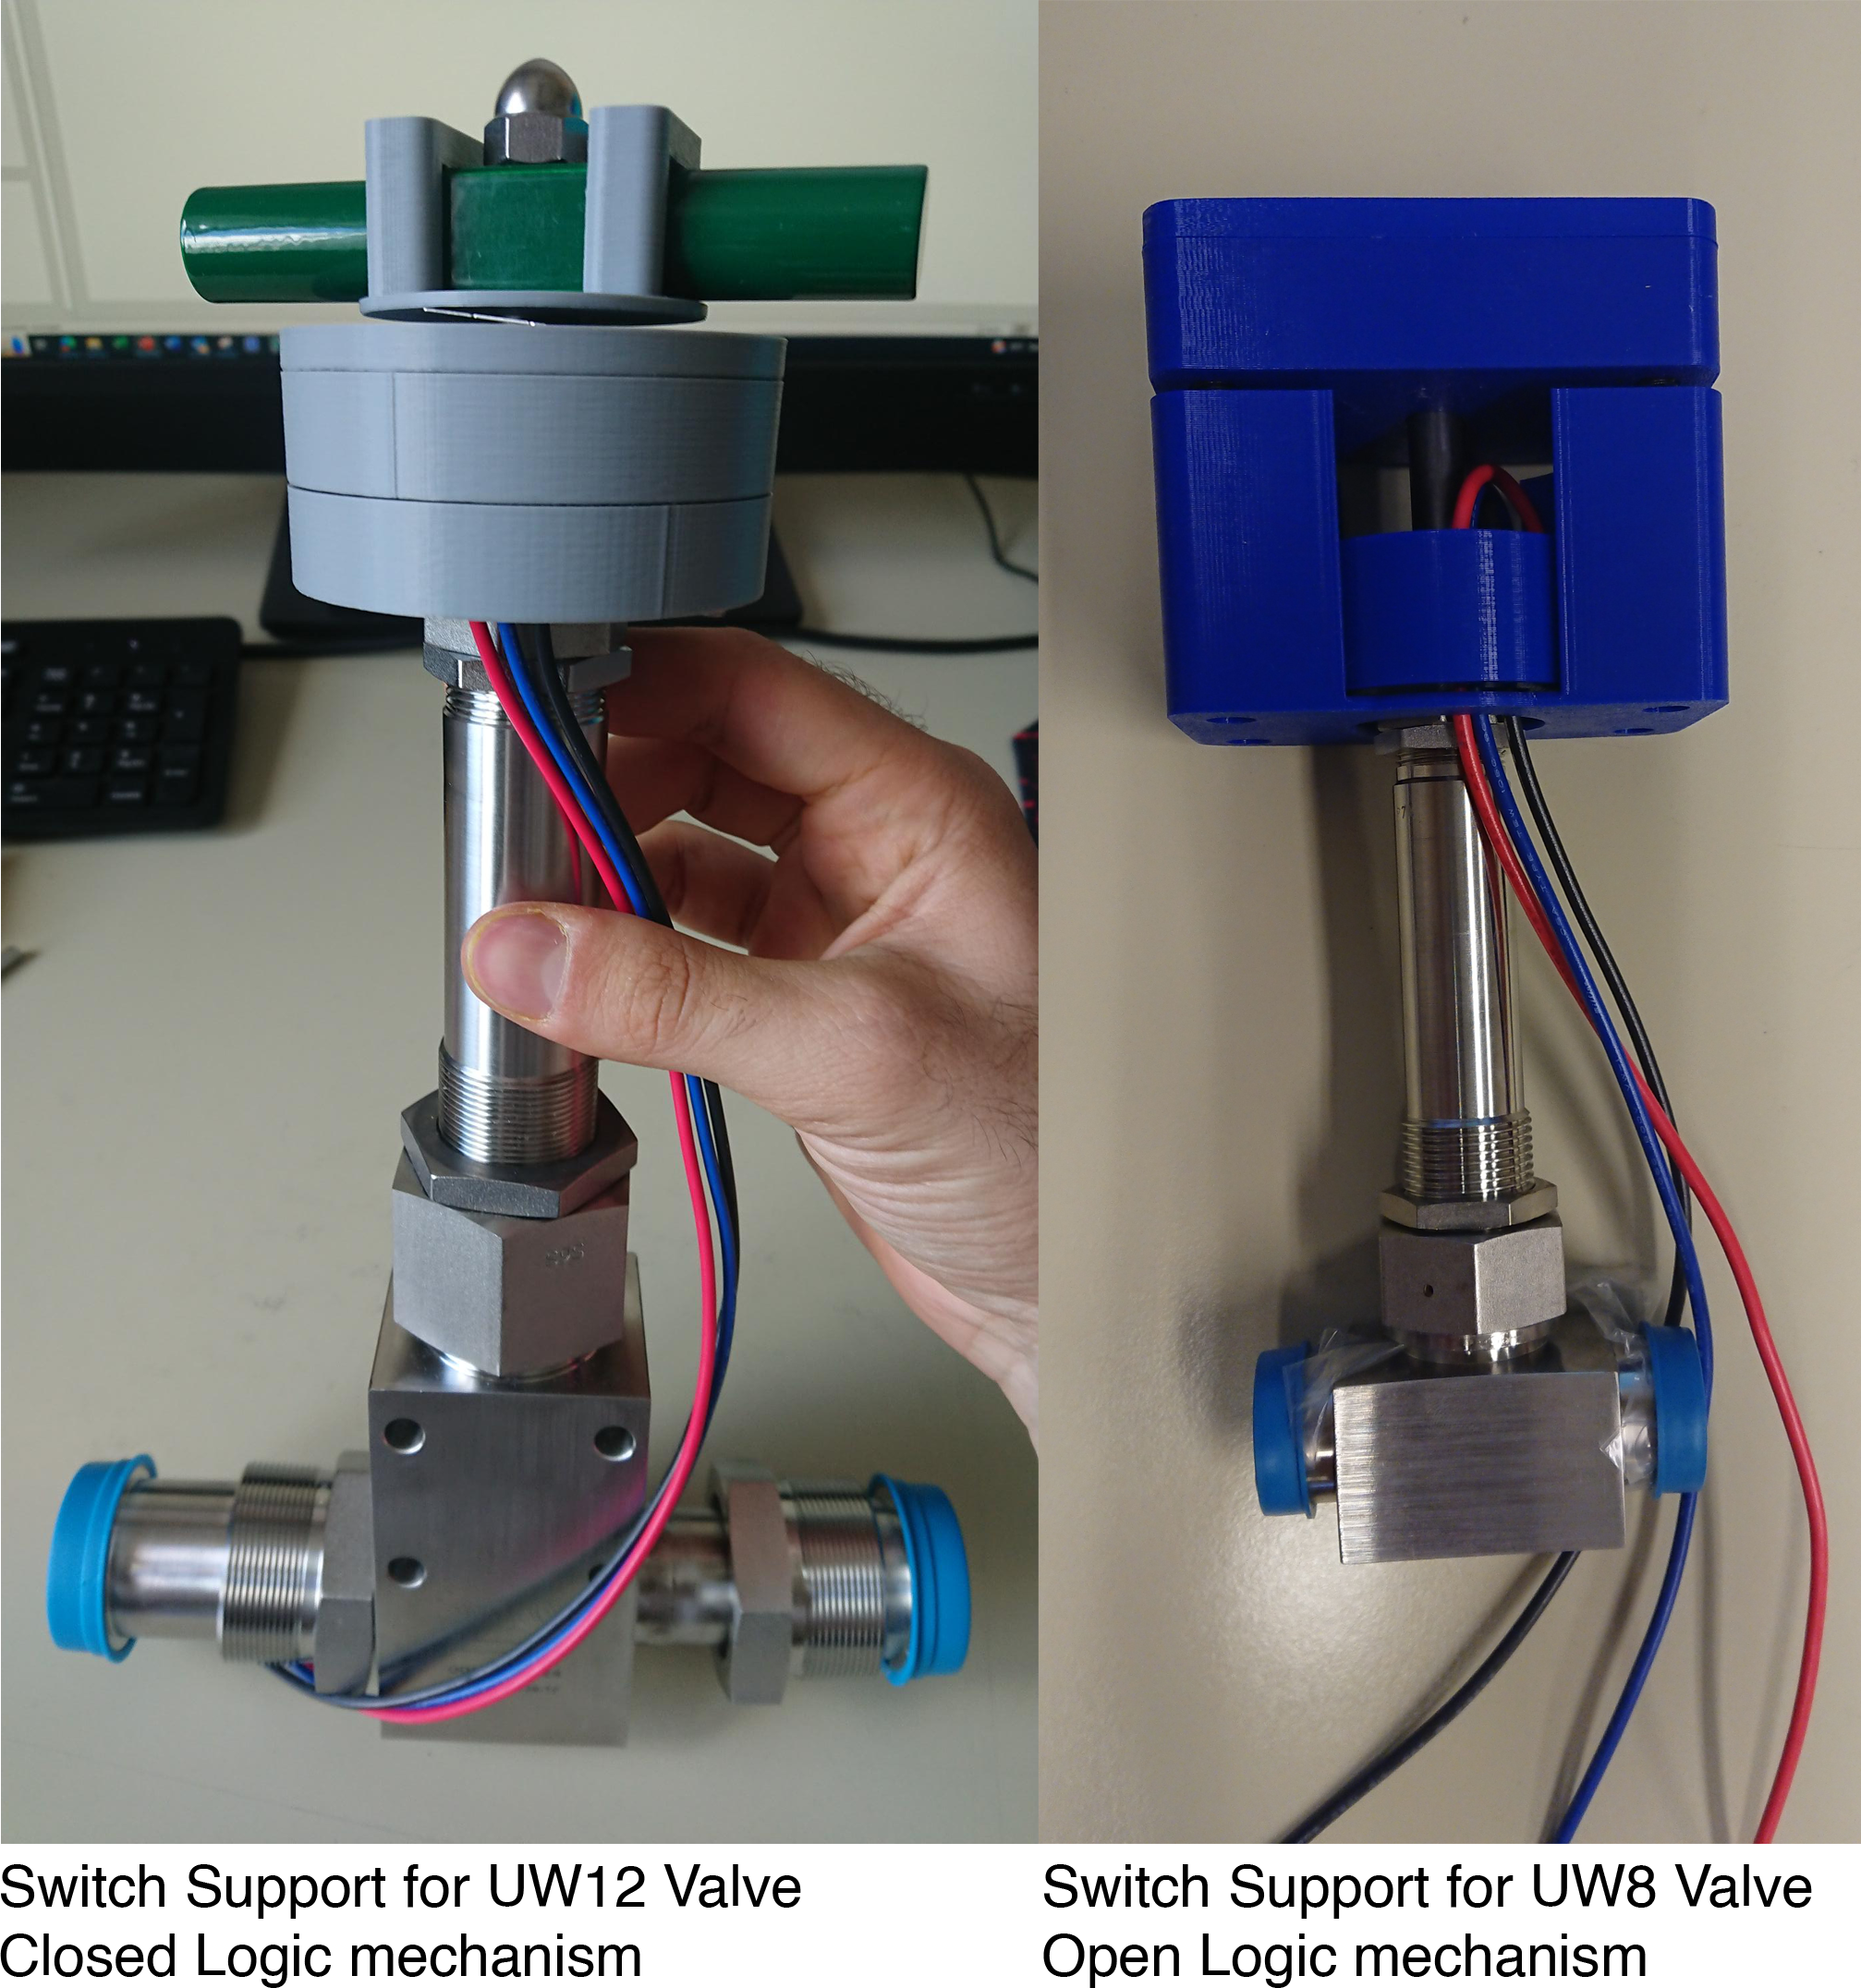 Switch Support for High Pressure valves